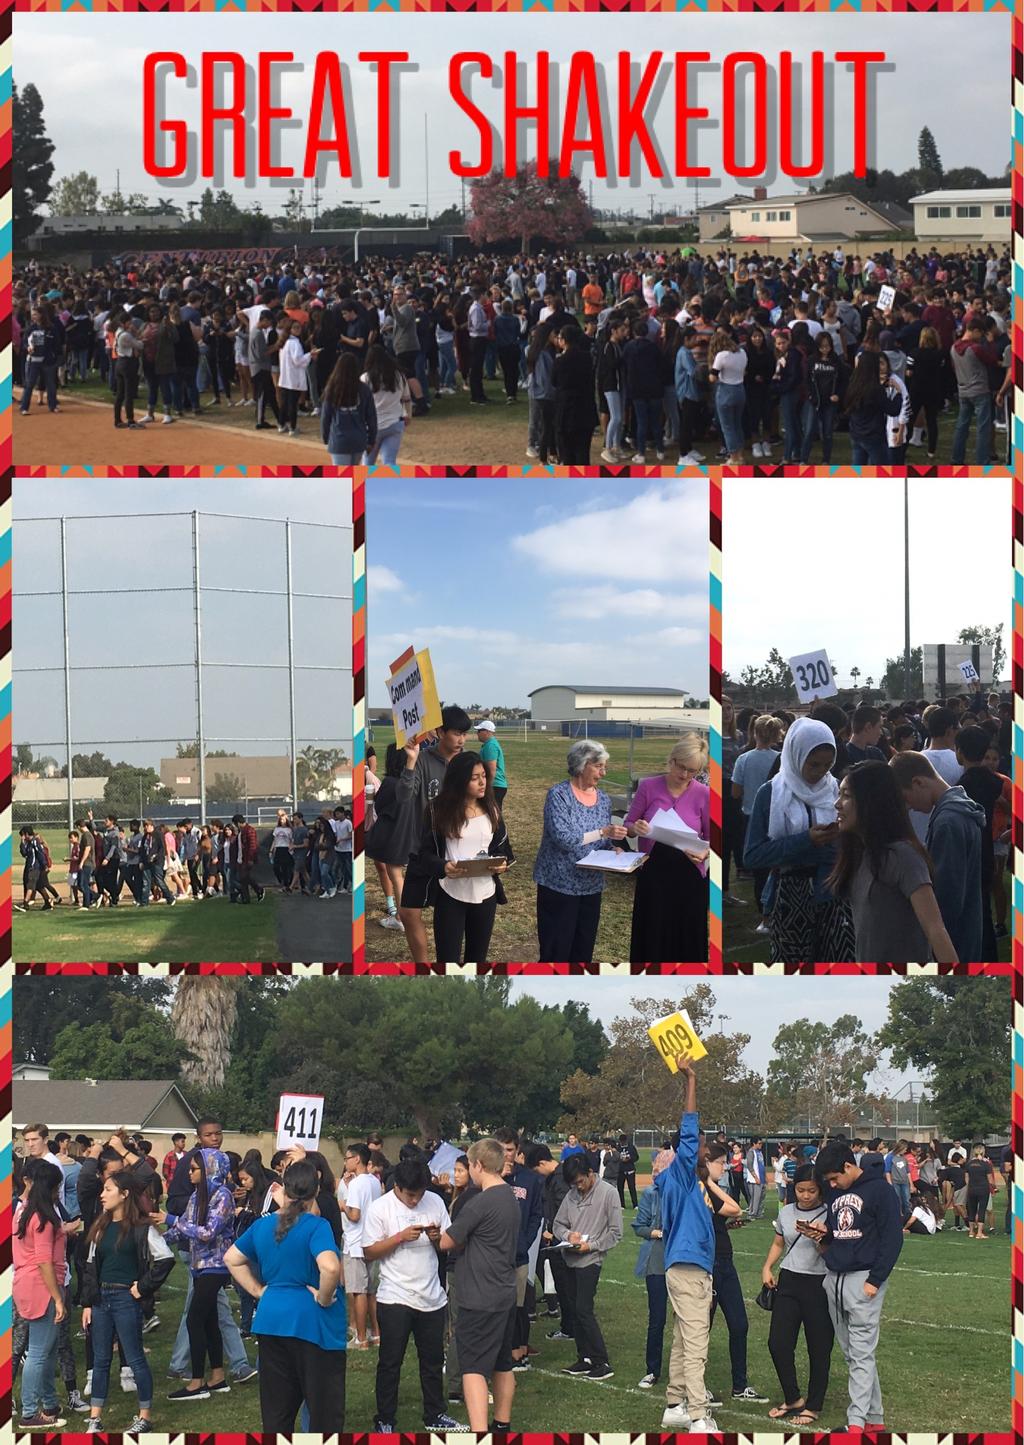 Cypress High School Earlier today, Cypress High School joined more than 10 million Californians for the Great ShakeOut Earthquake Drill.